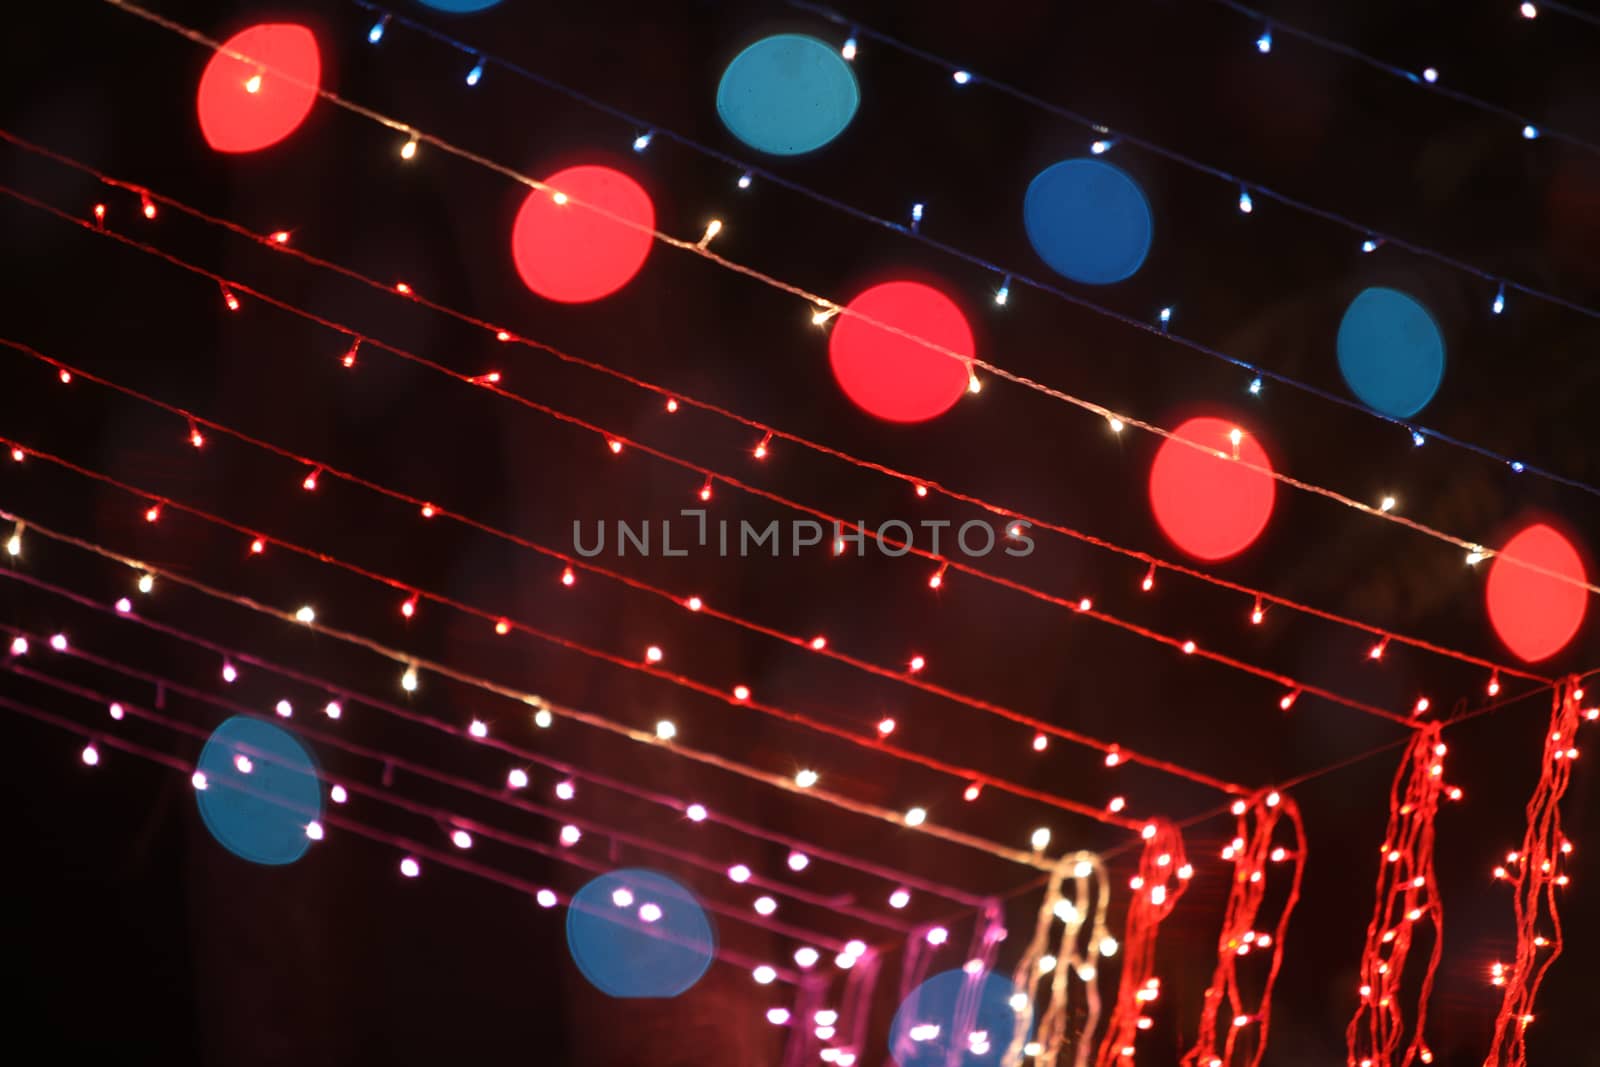 Decoration done with colorful lighting wires during a traditional festival or ceremony.